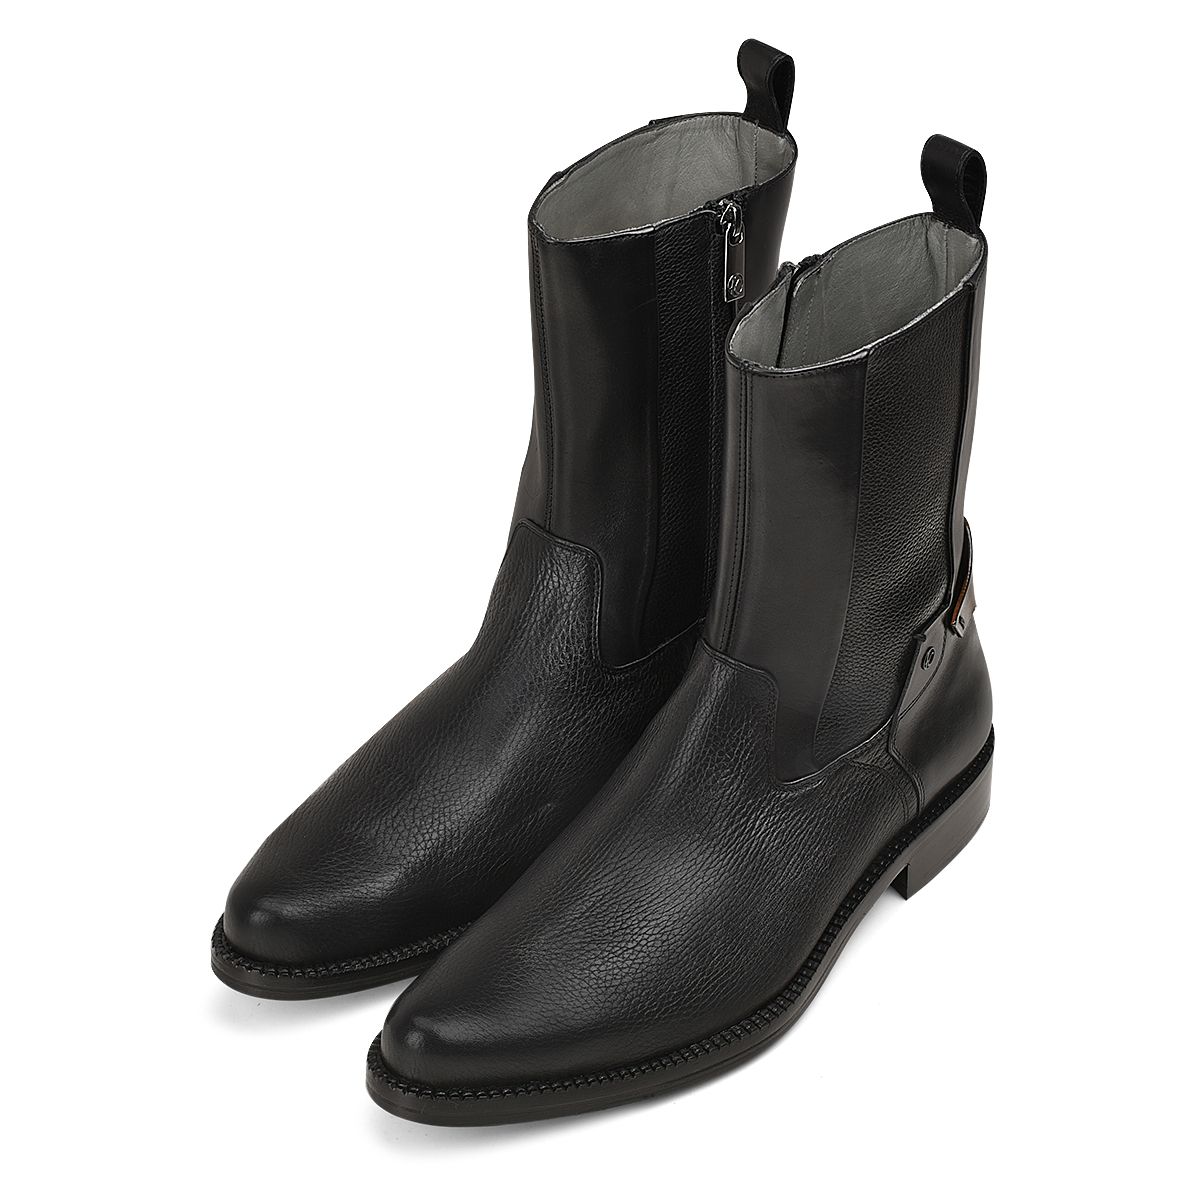 Black deer leather boots, Men's dress boots in genuine deerskin and bovine leather. Hardware with the Franco Cuadra monogram.